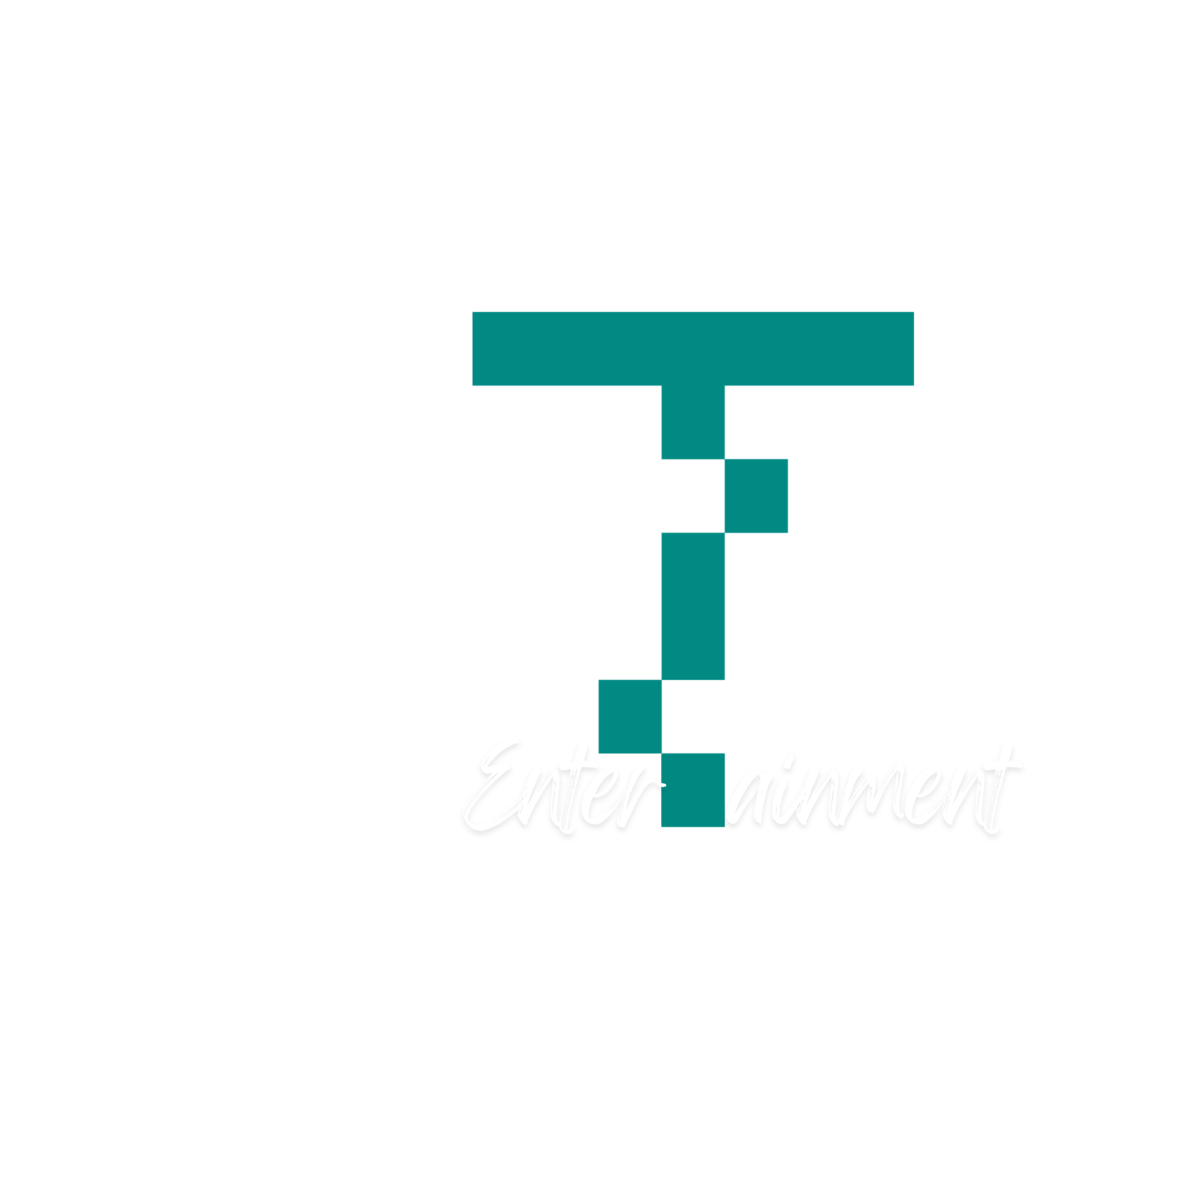 Muster ent